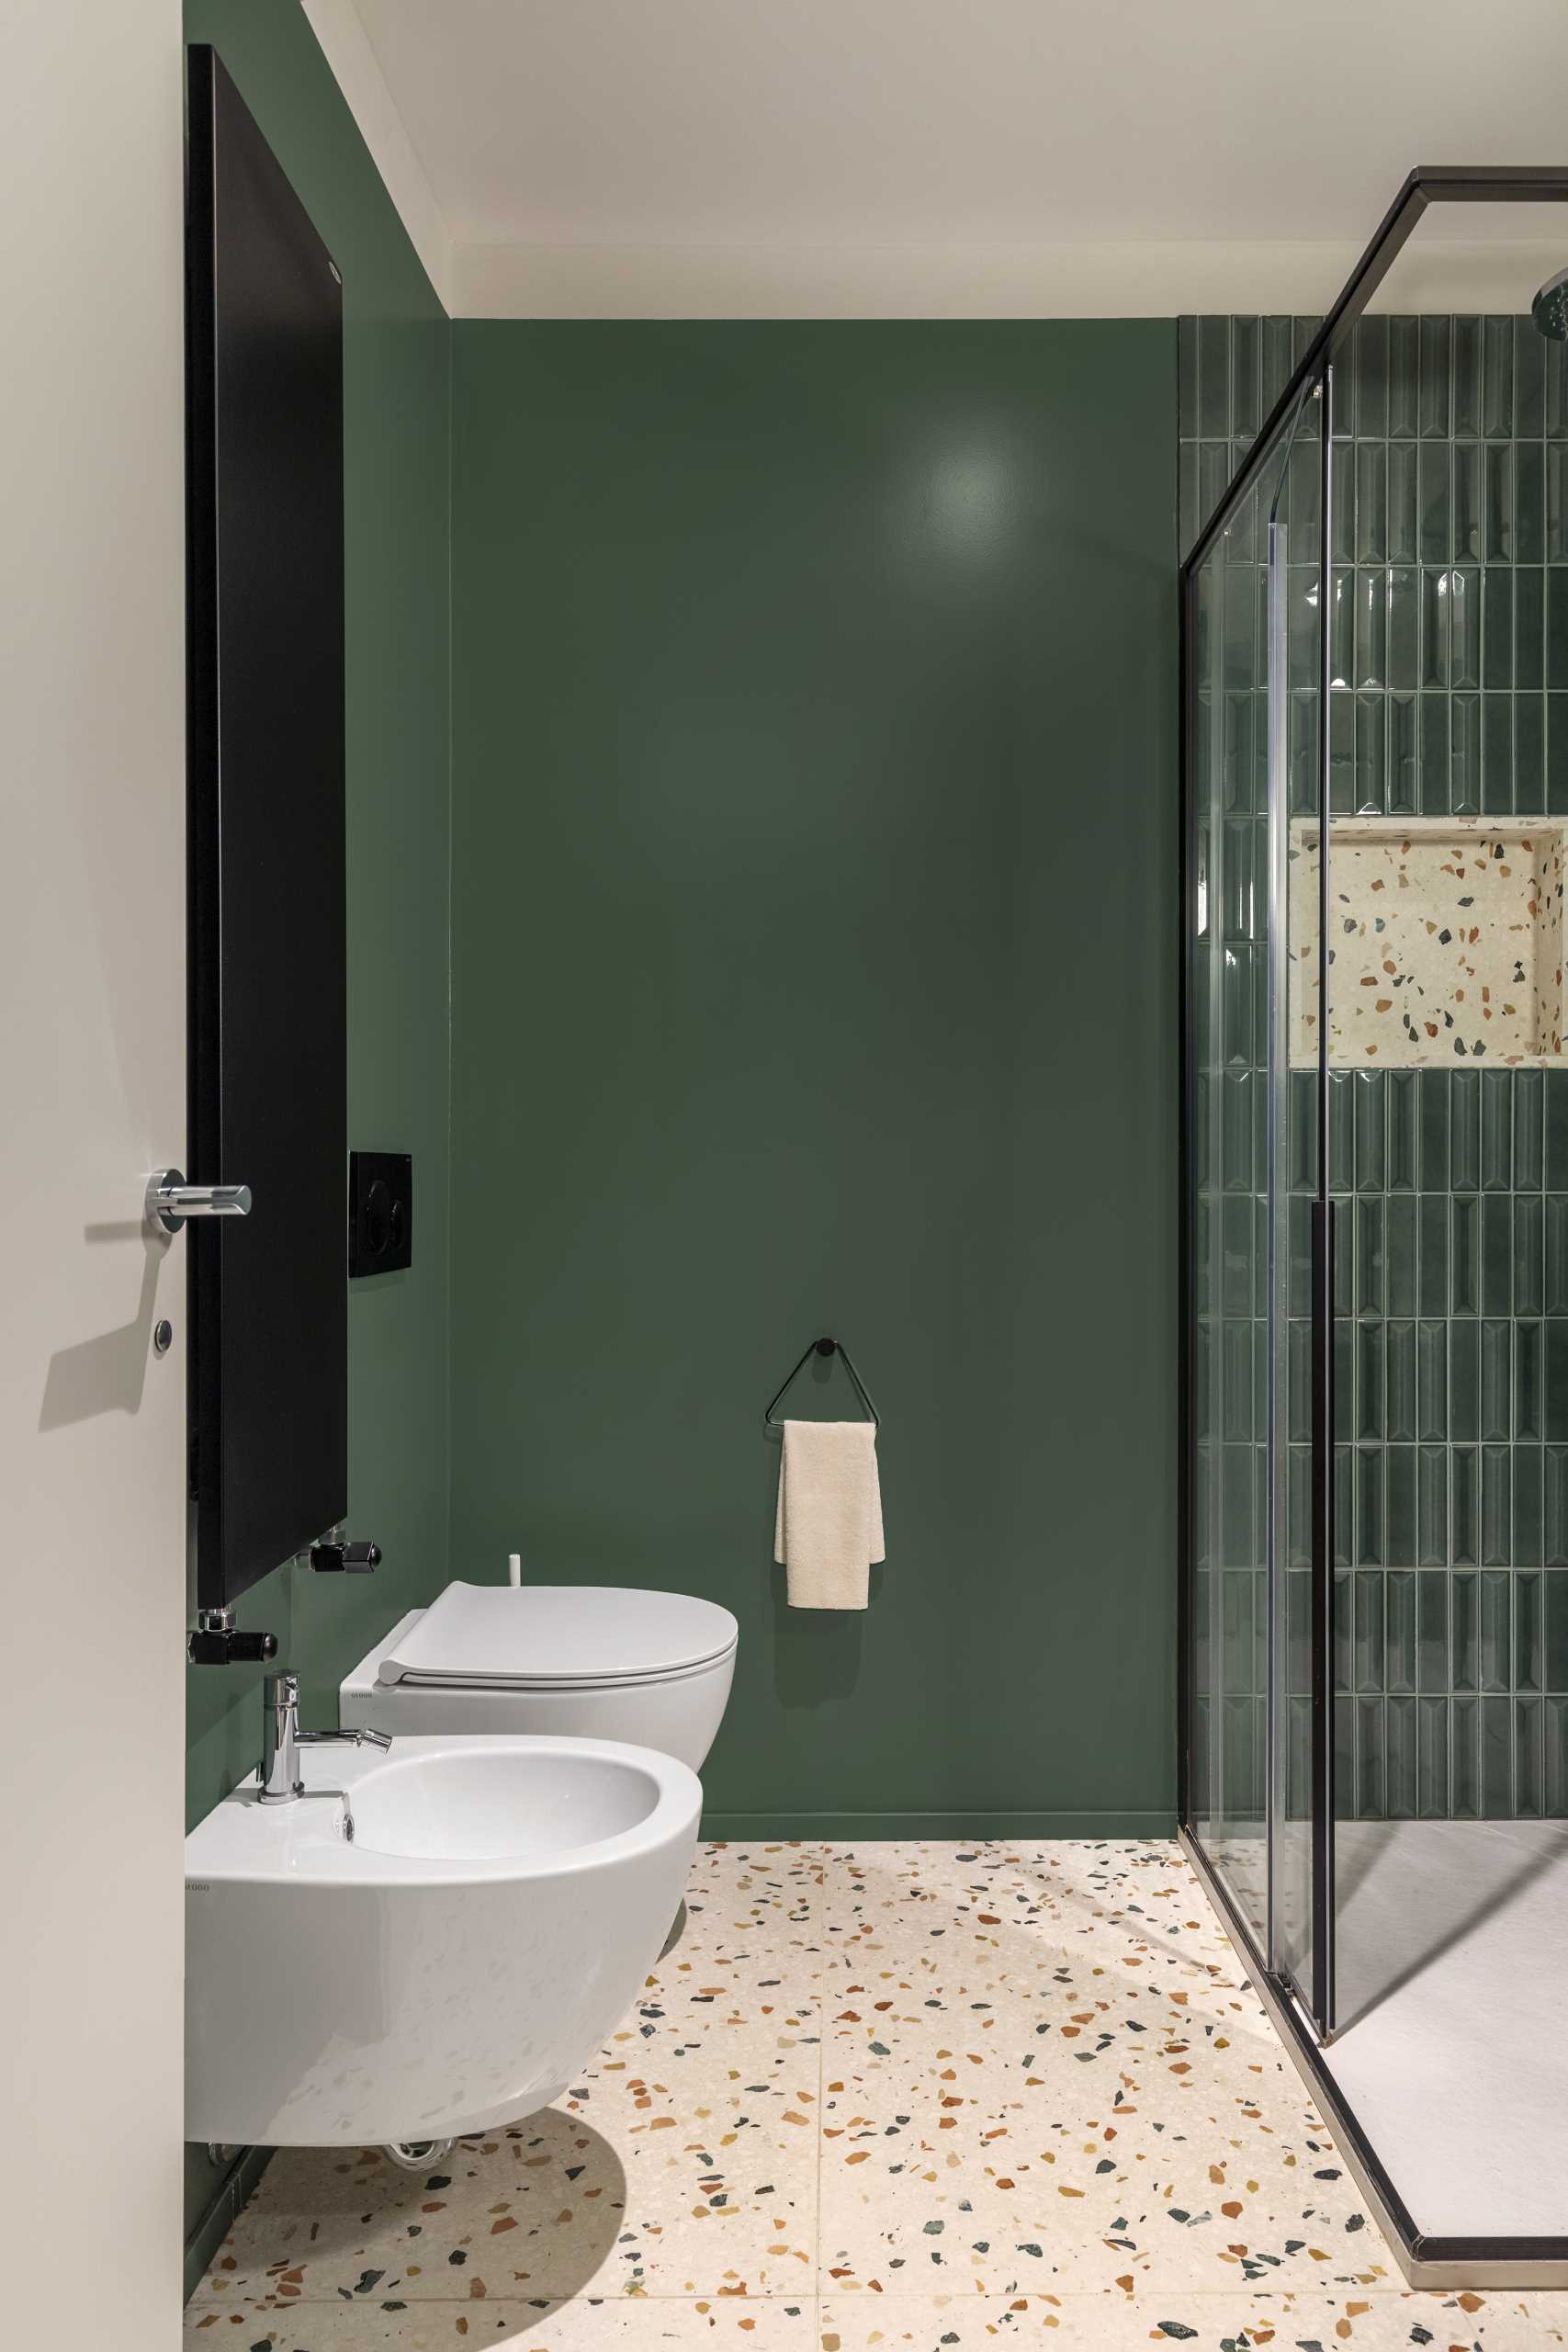 In this guest bathroom, deep green is the chosen color for the tiles and walls, complimenting the various colors found in the Terrazzo resin marble used for the vanity and wall behind the mirror.